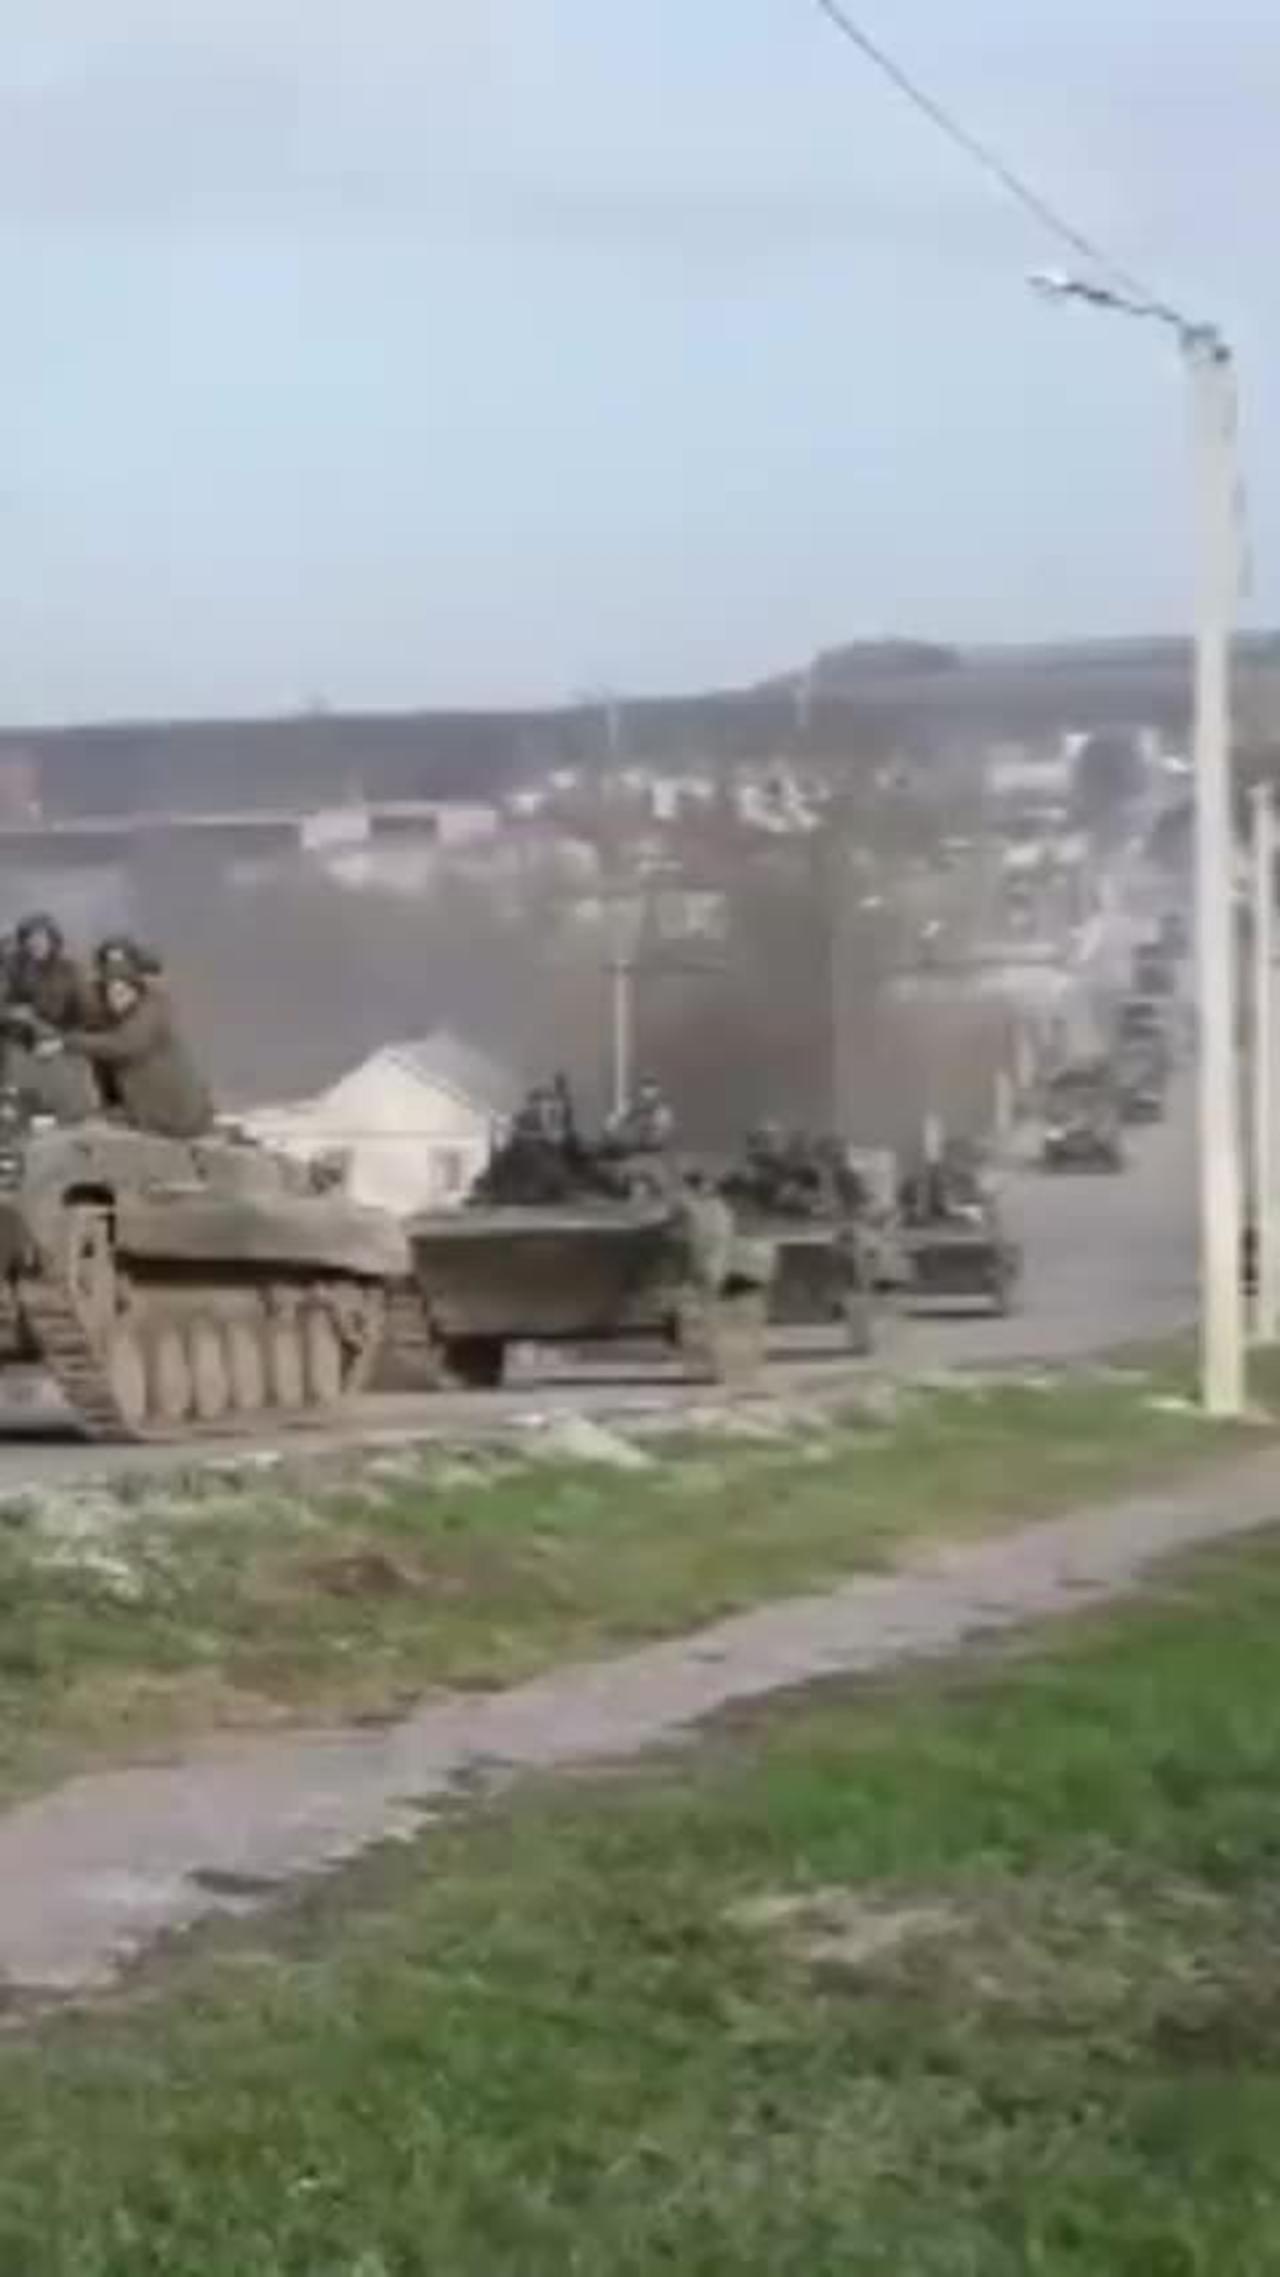 Russian troops advance through liberated territory in Ukraine